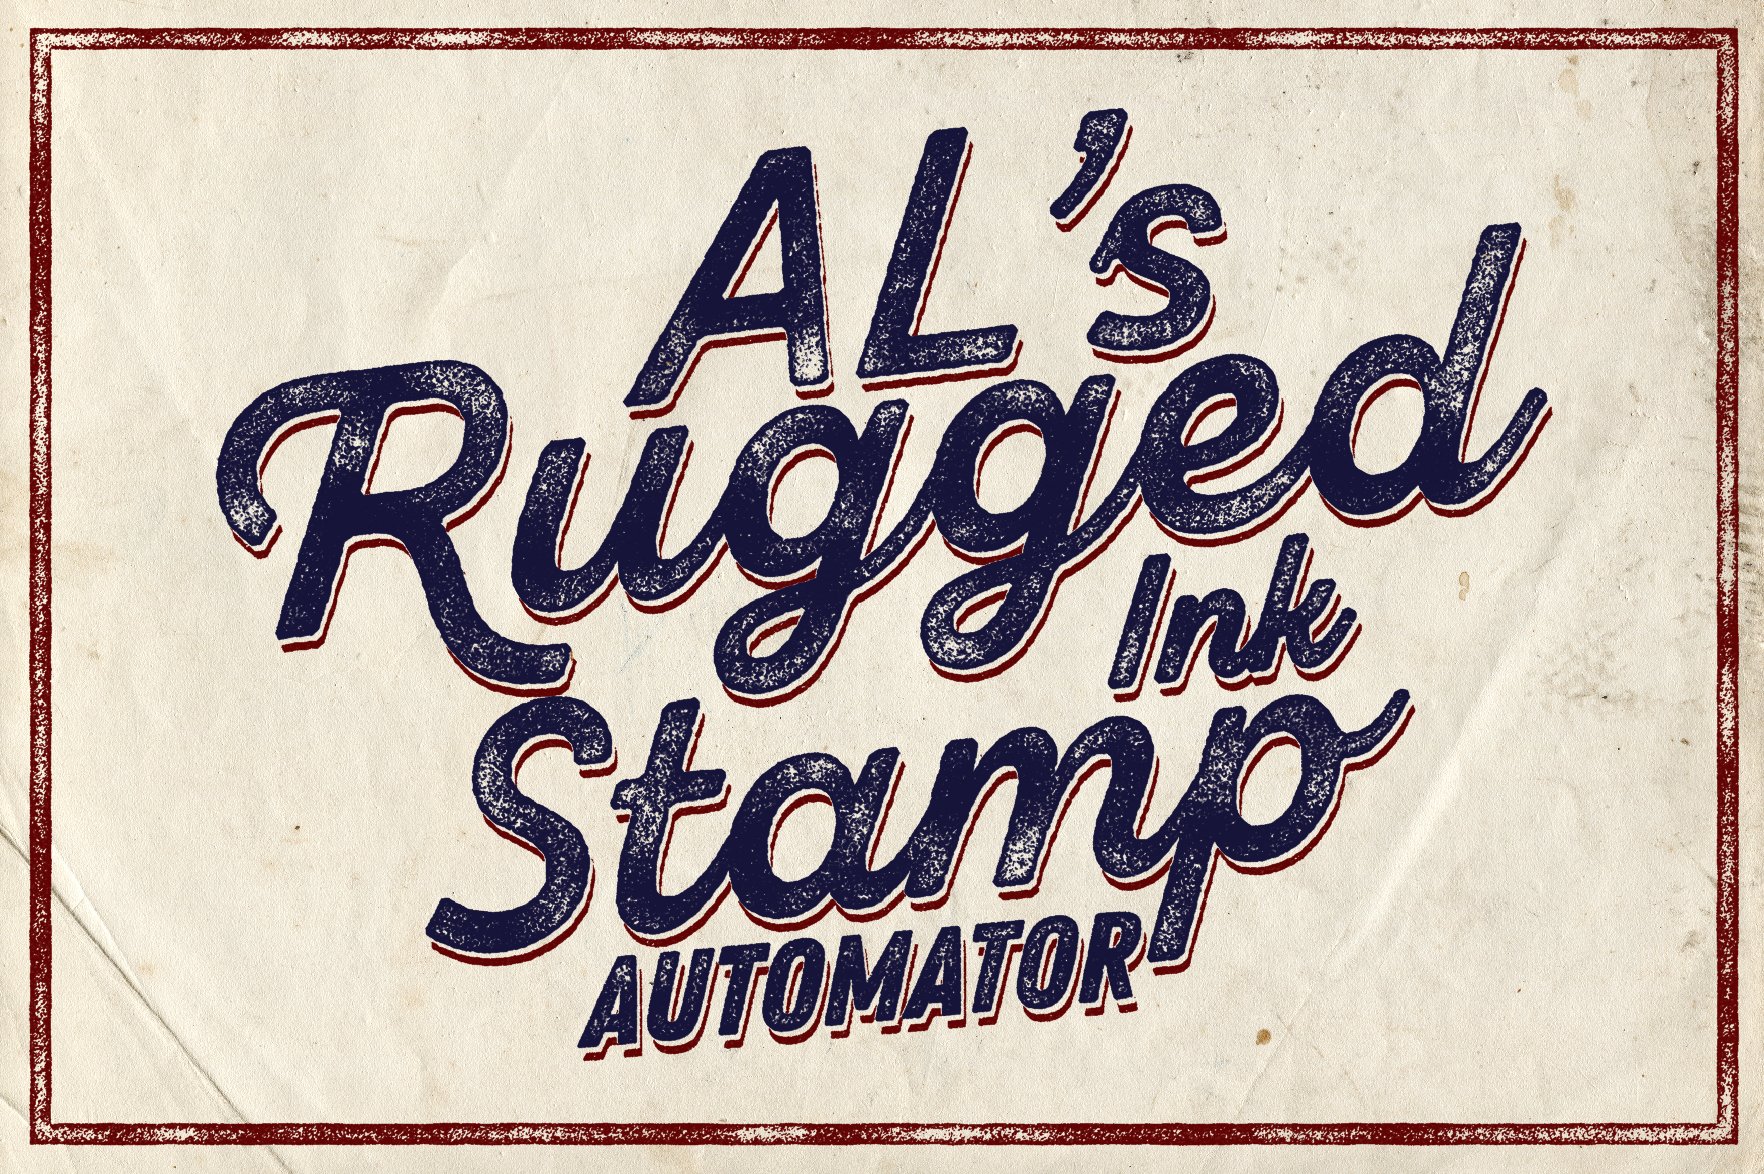 AL's Rugged Ink Stamp Automatorcover image.